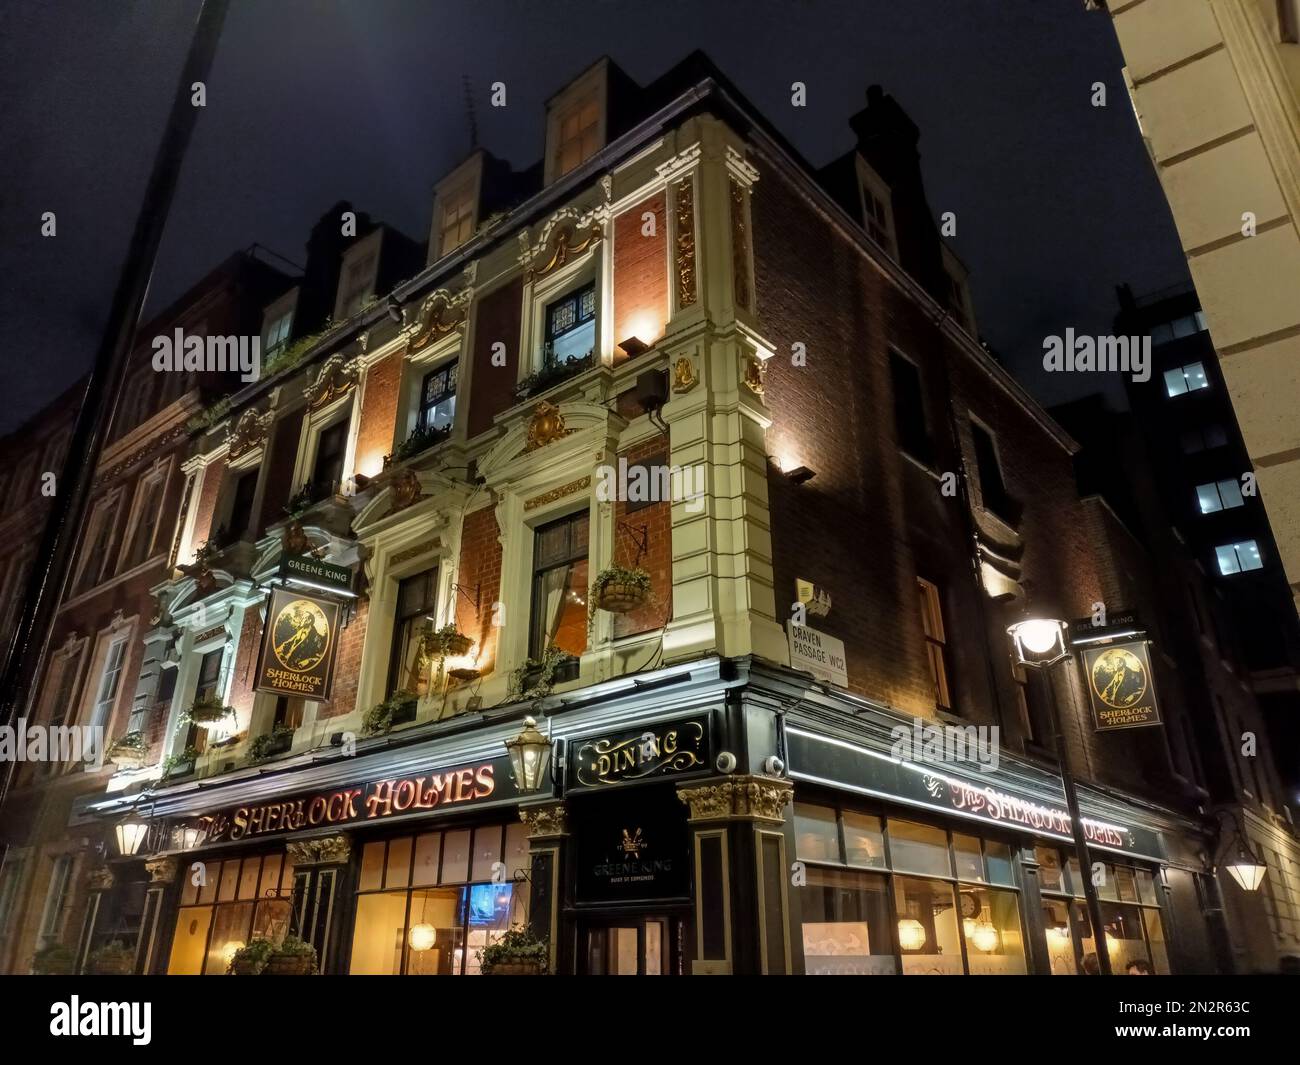 The Sherlock Holmes pub at night in Westminster, London Stock Photo